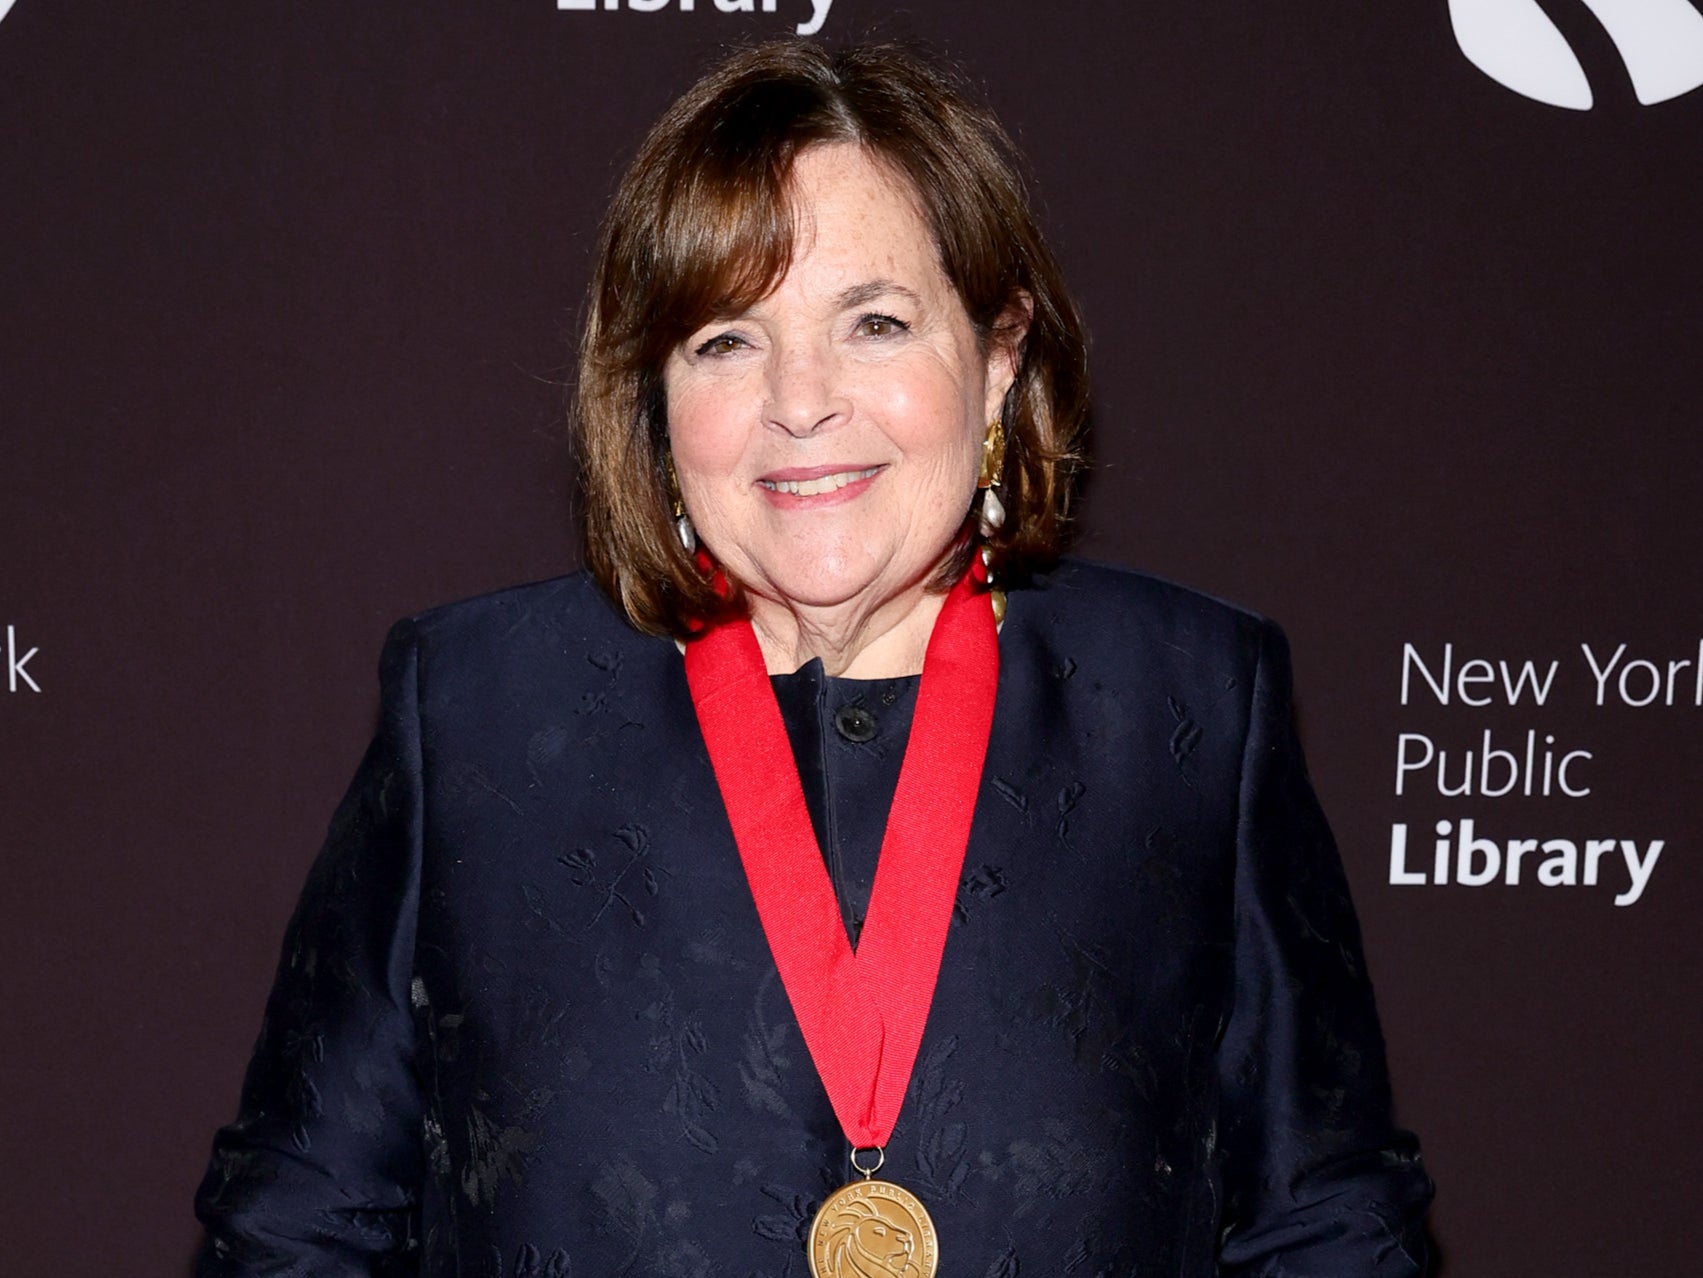 Ina Garten photographed at an event for the New York Public Library